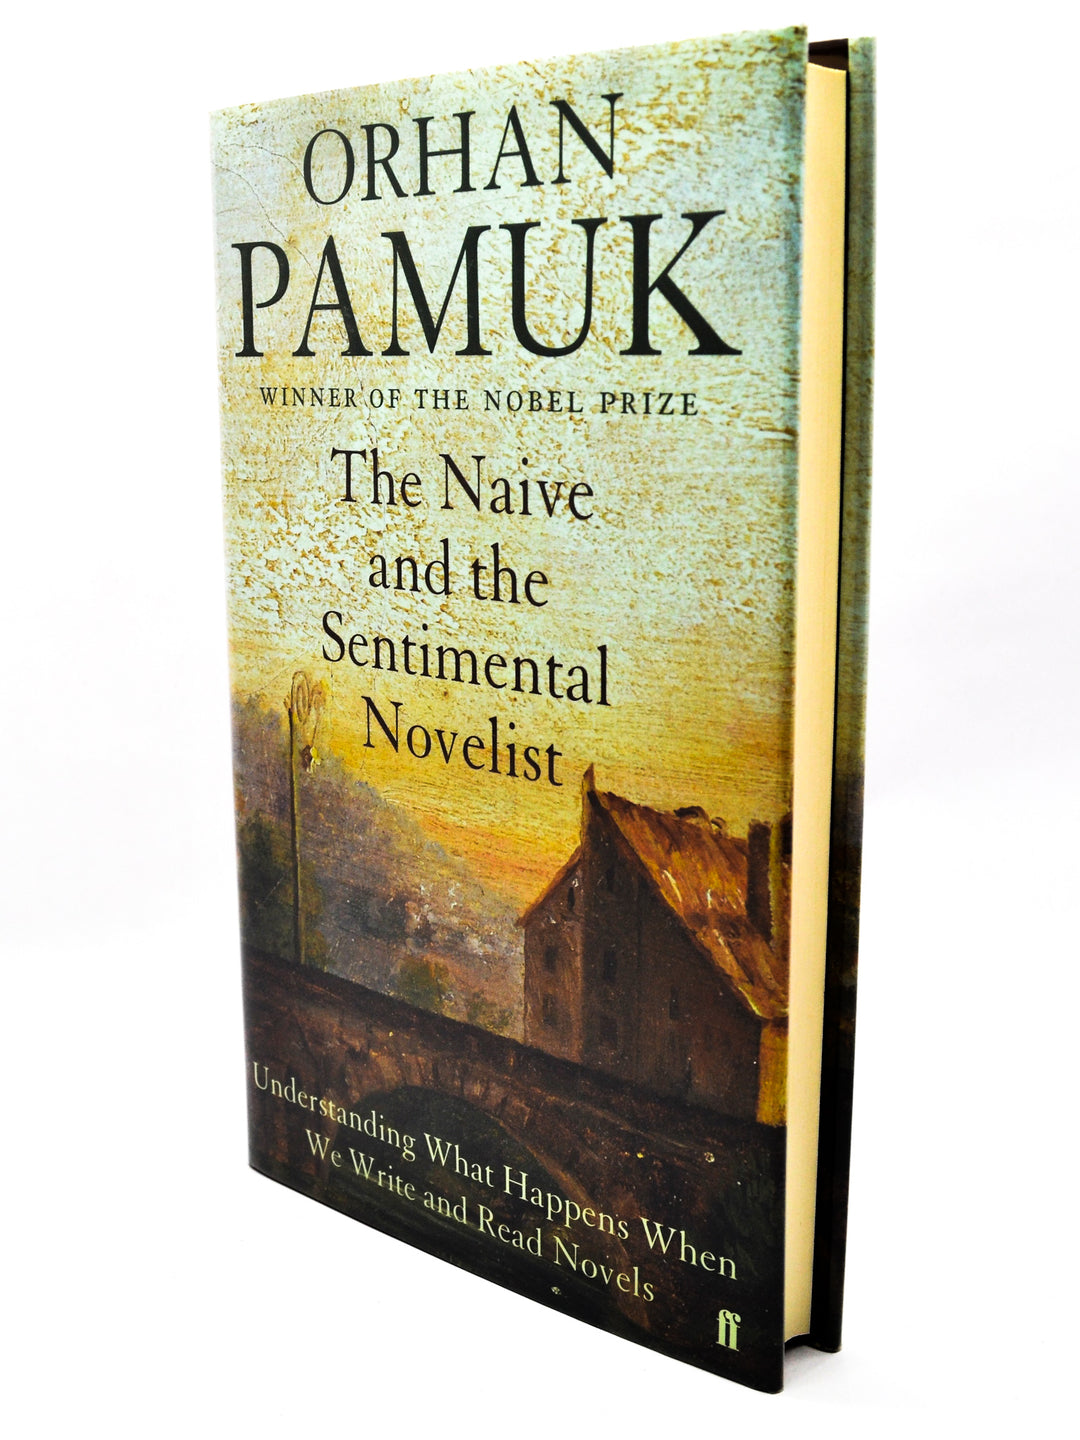 Pamuk, Orhan - The Naive and Sentimental Novelist - SIGNED | front cover